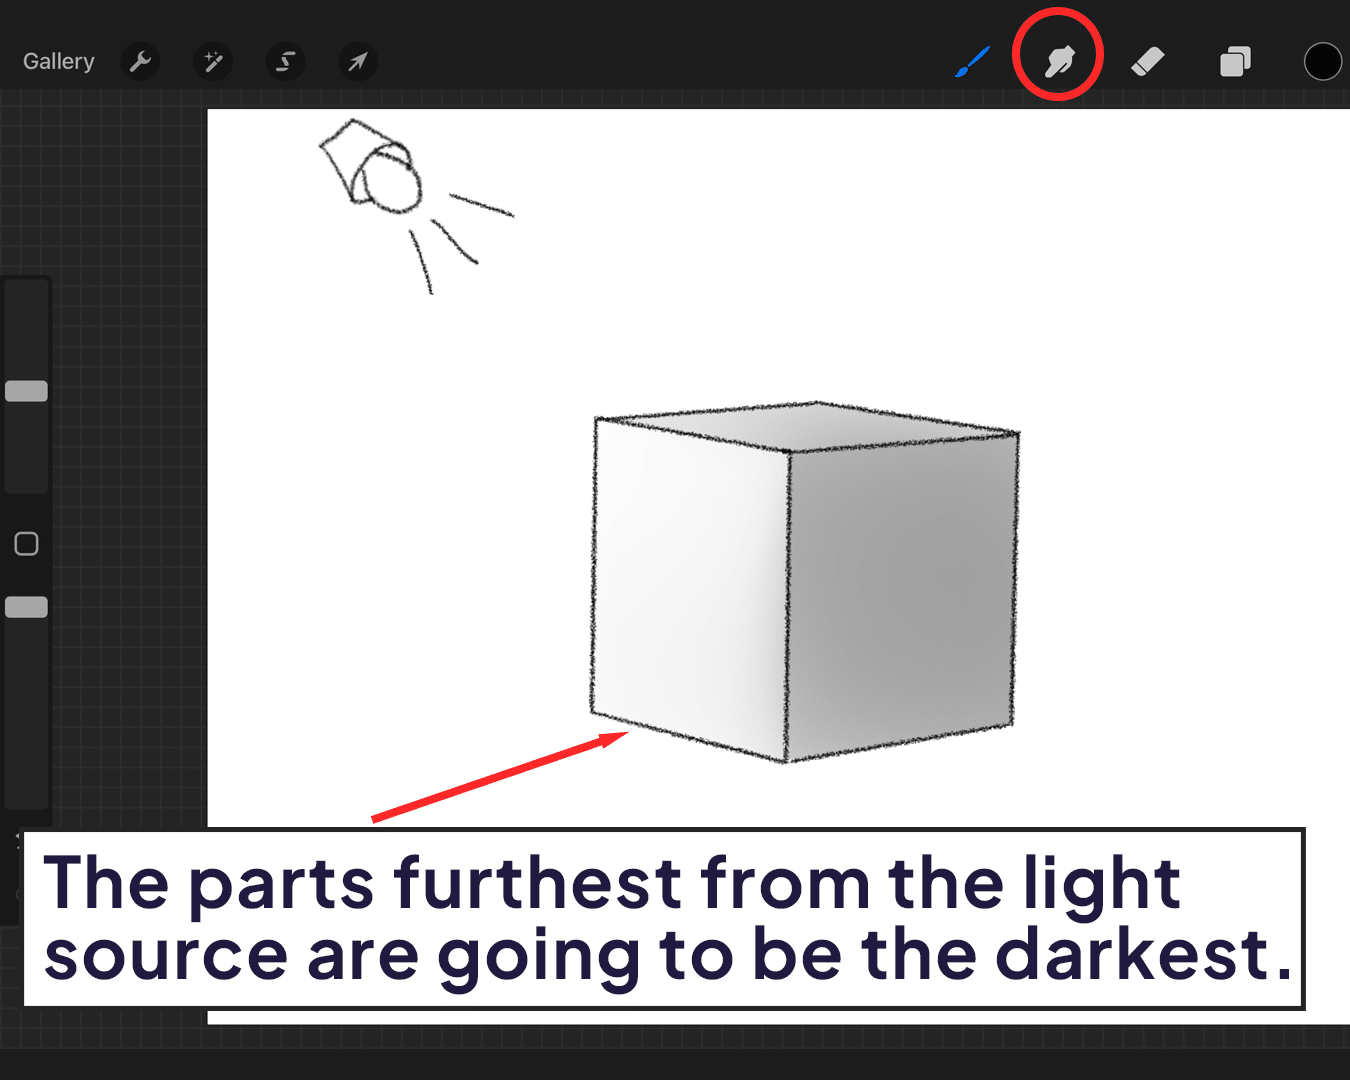 Darkest parts are furthest from the light